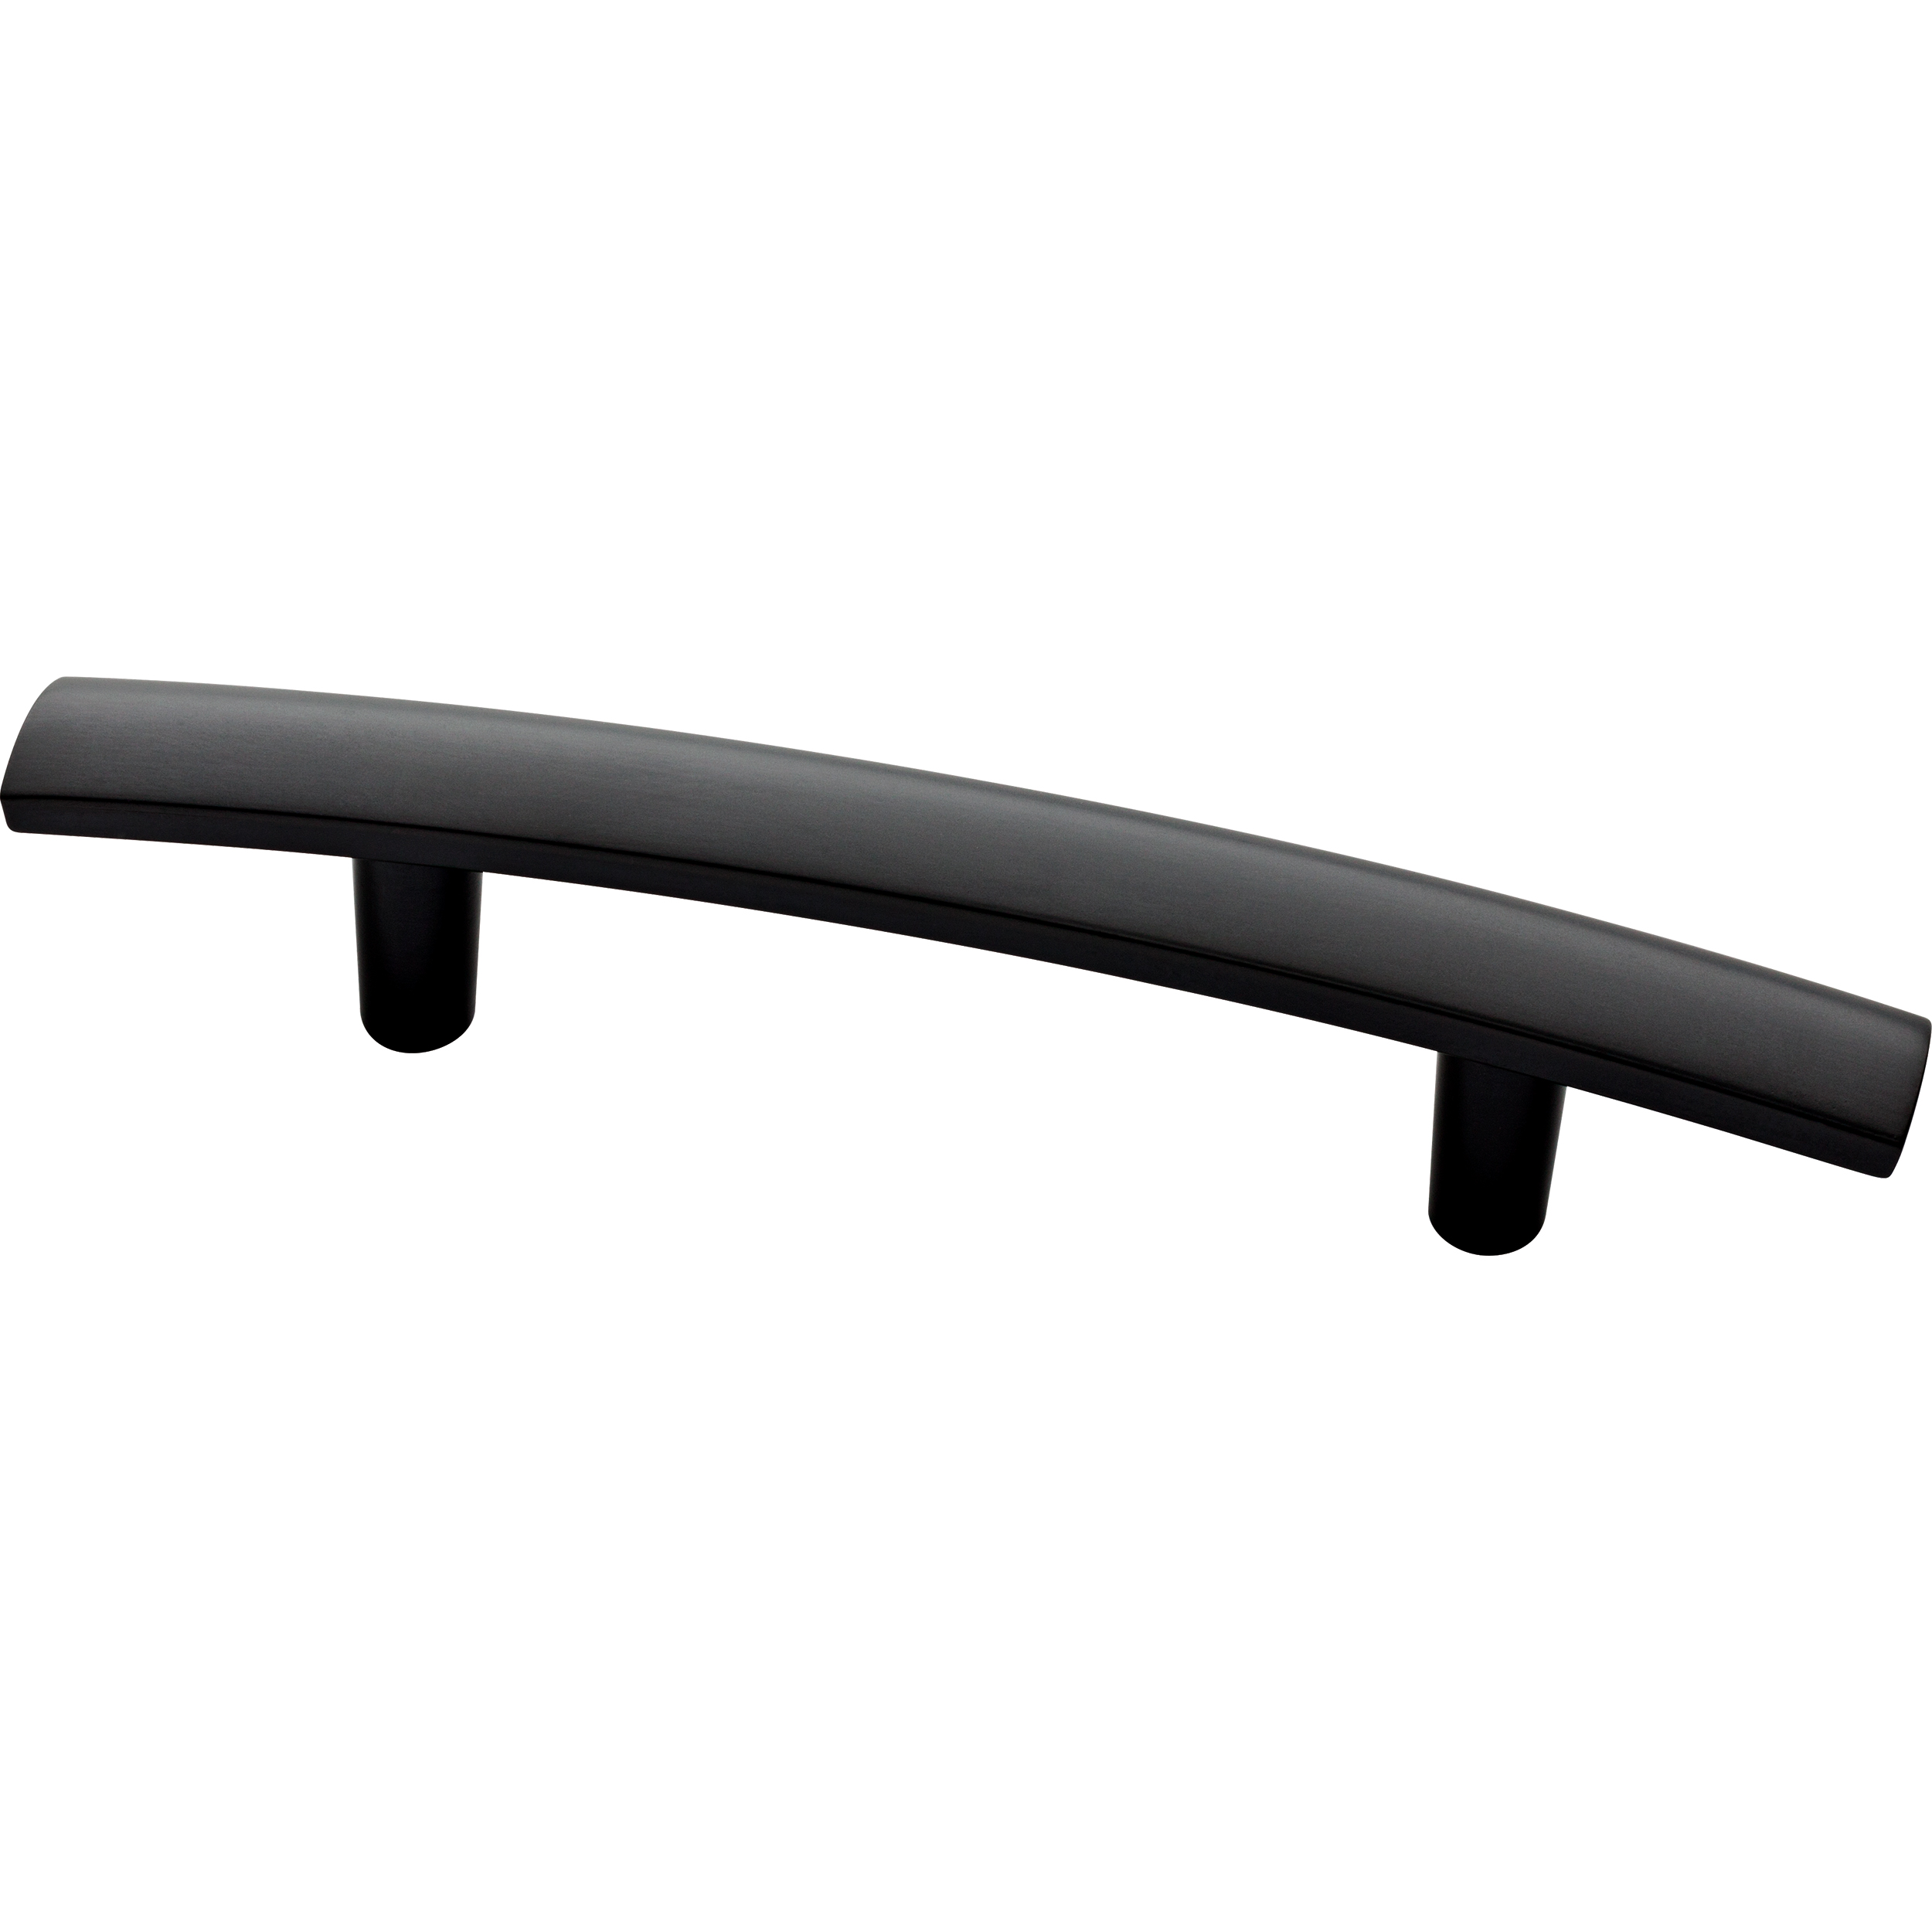  Franklin Brass B42302M-FB-C 3 in. Heavy Duty Coat and Hat Wall  Hooks in Matte Black (5-Pack) : Home & Kitchen